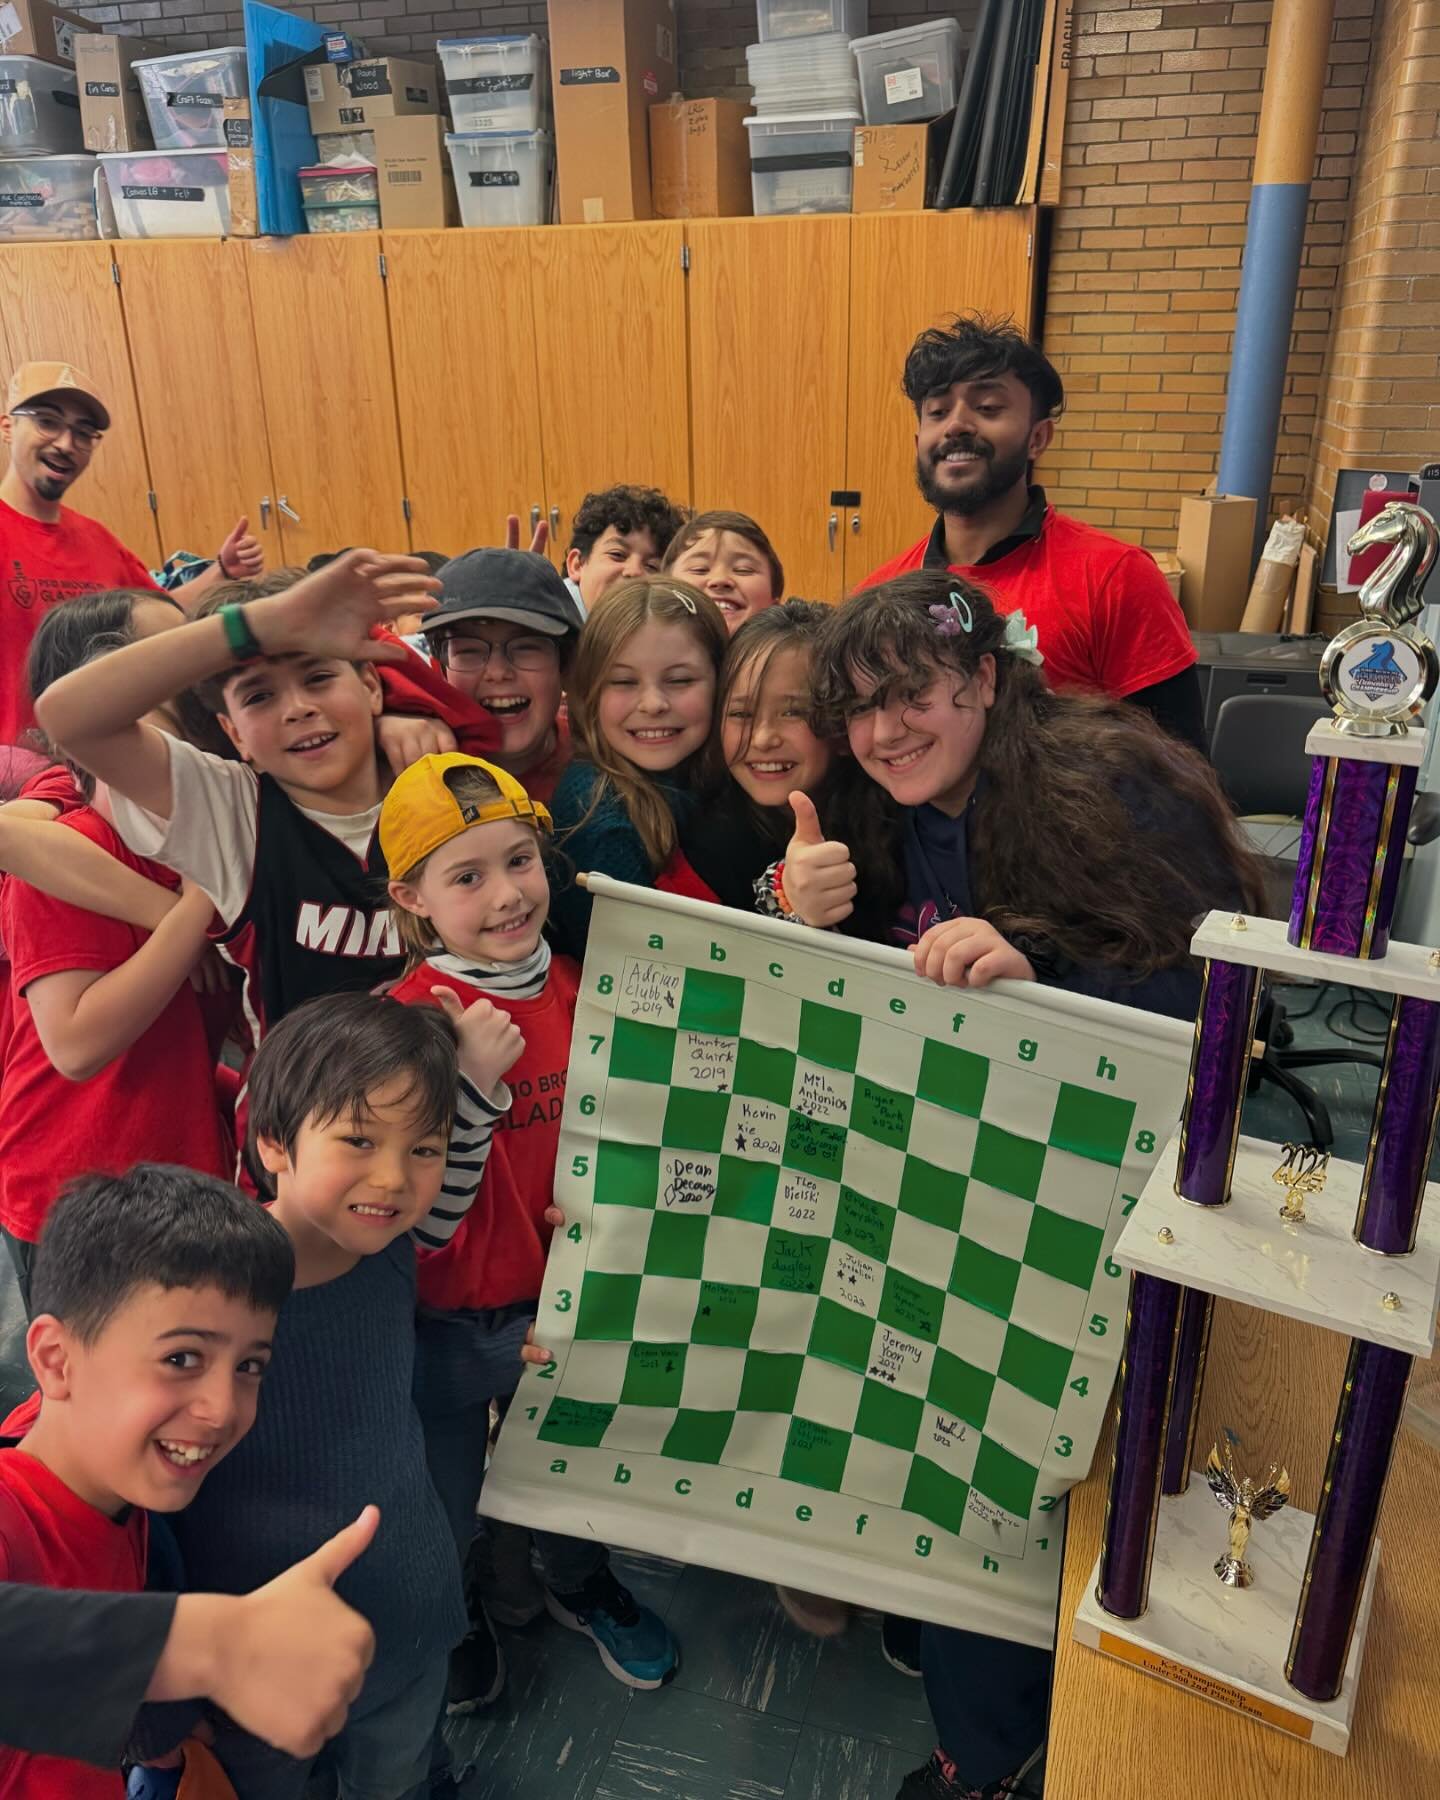 Join us in congratulating fellow PS 10 Gladiator, Josephine Finkler, in breaking 1000 USCF and signing the PS10 Hall Of Fame! This past weekend, Josie scored 6 points at Nationals to help her team secure second place in K5U900! #1000plususcf #ps10hal